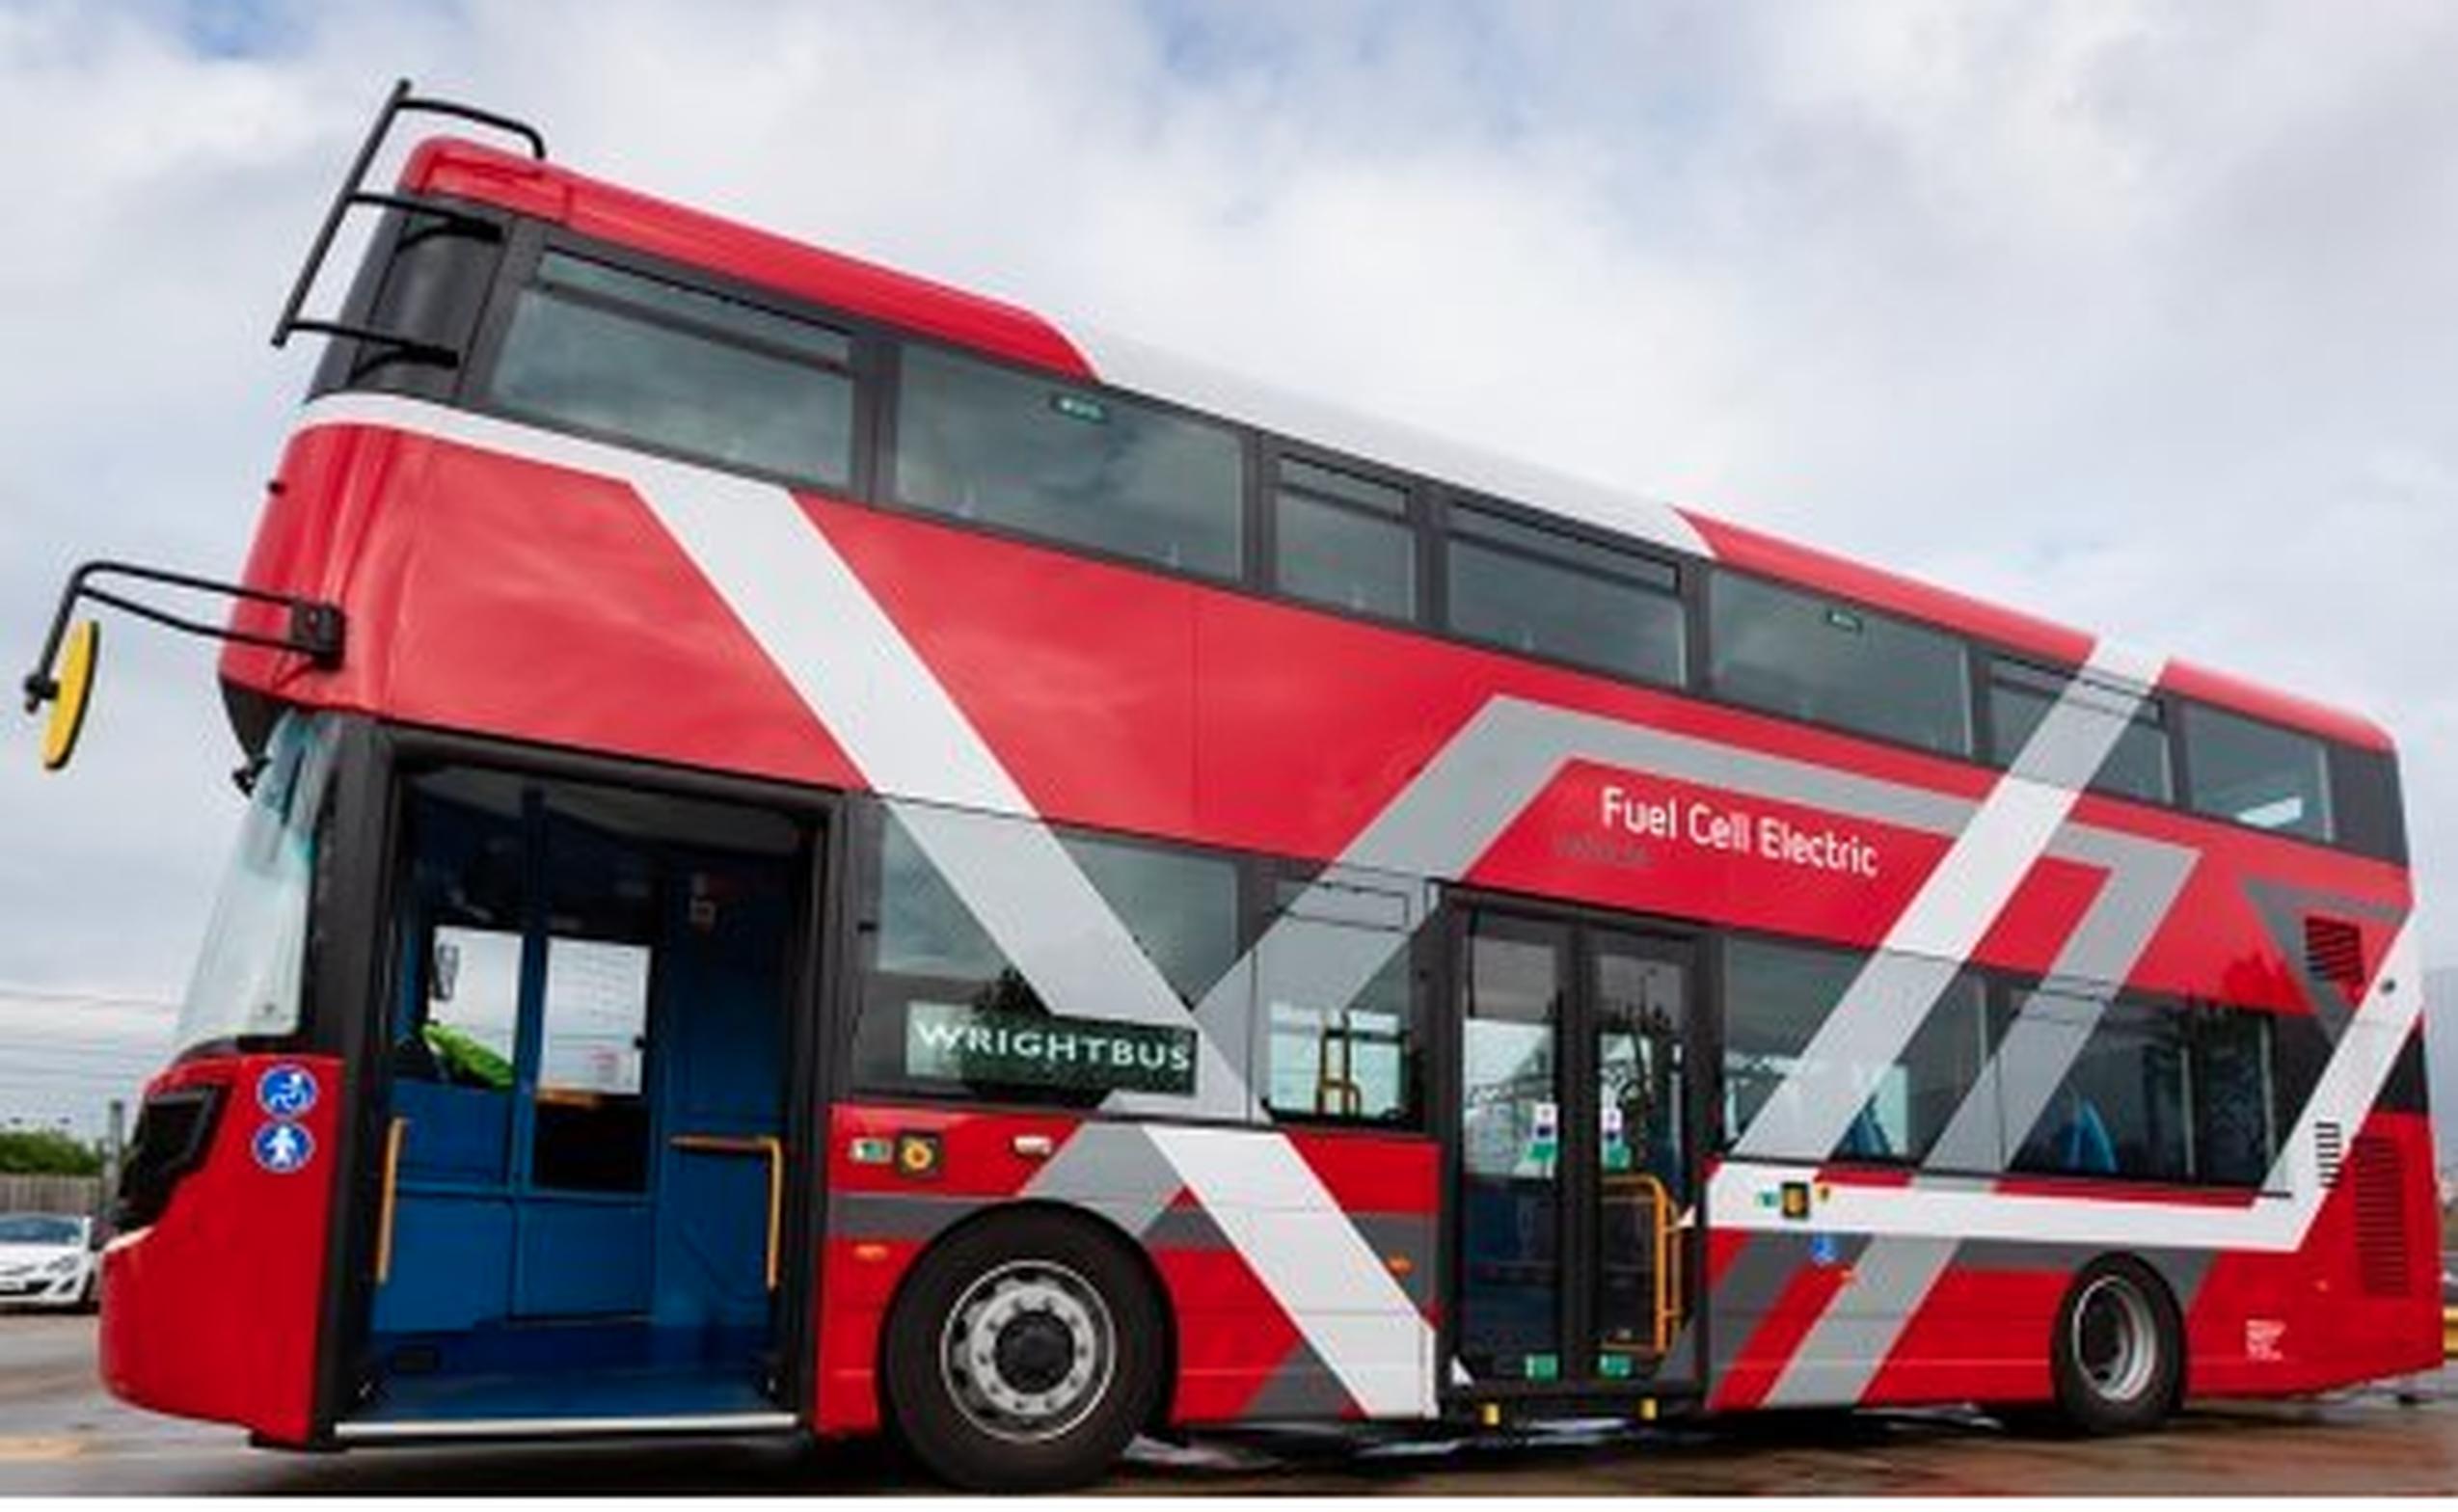 Jo Bamford, owner of both Wrightbus and green hydrogen production company Ryse, has plans for the rollout of 3,000 hydrogen buses in the UK by 2024